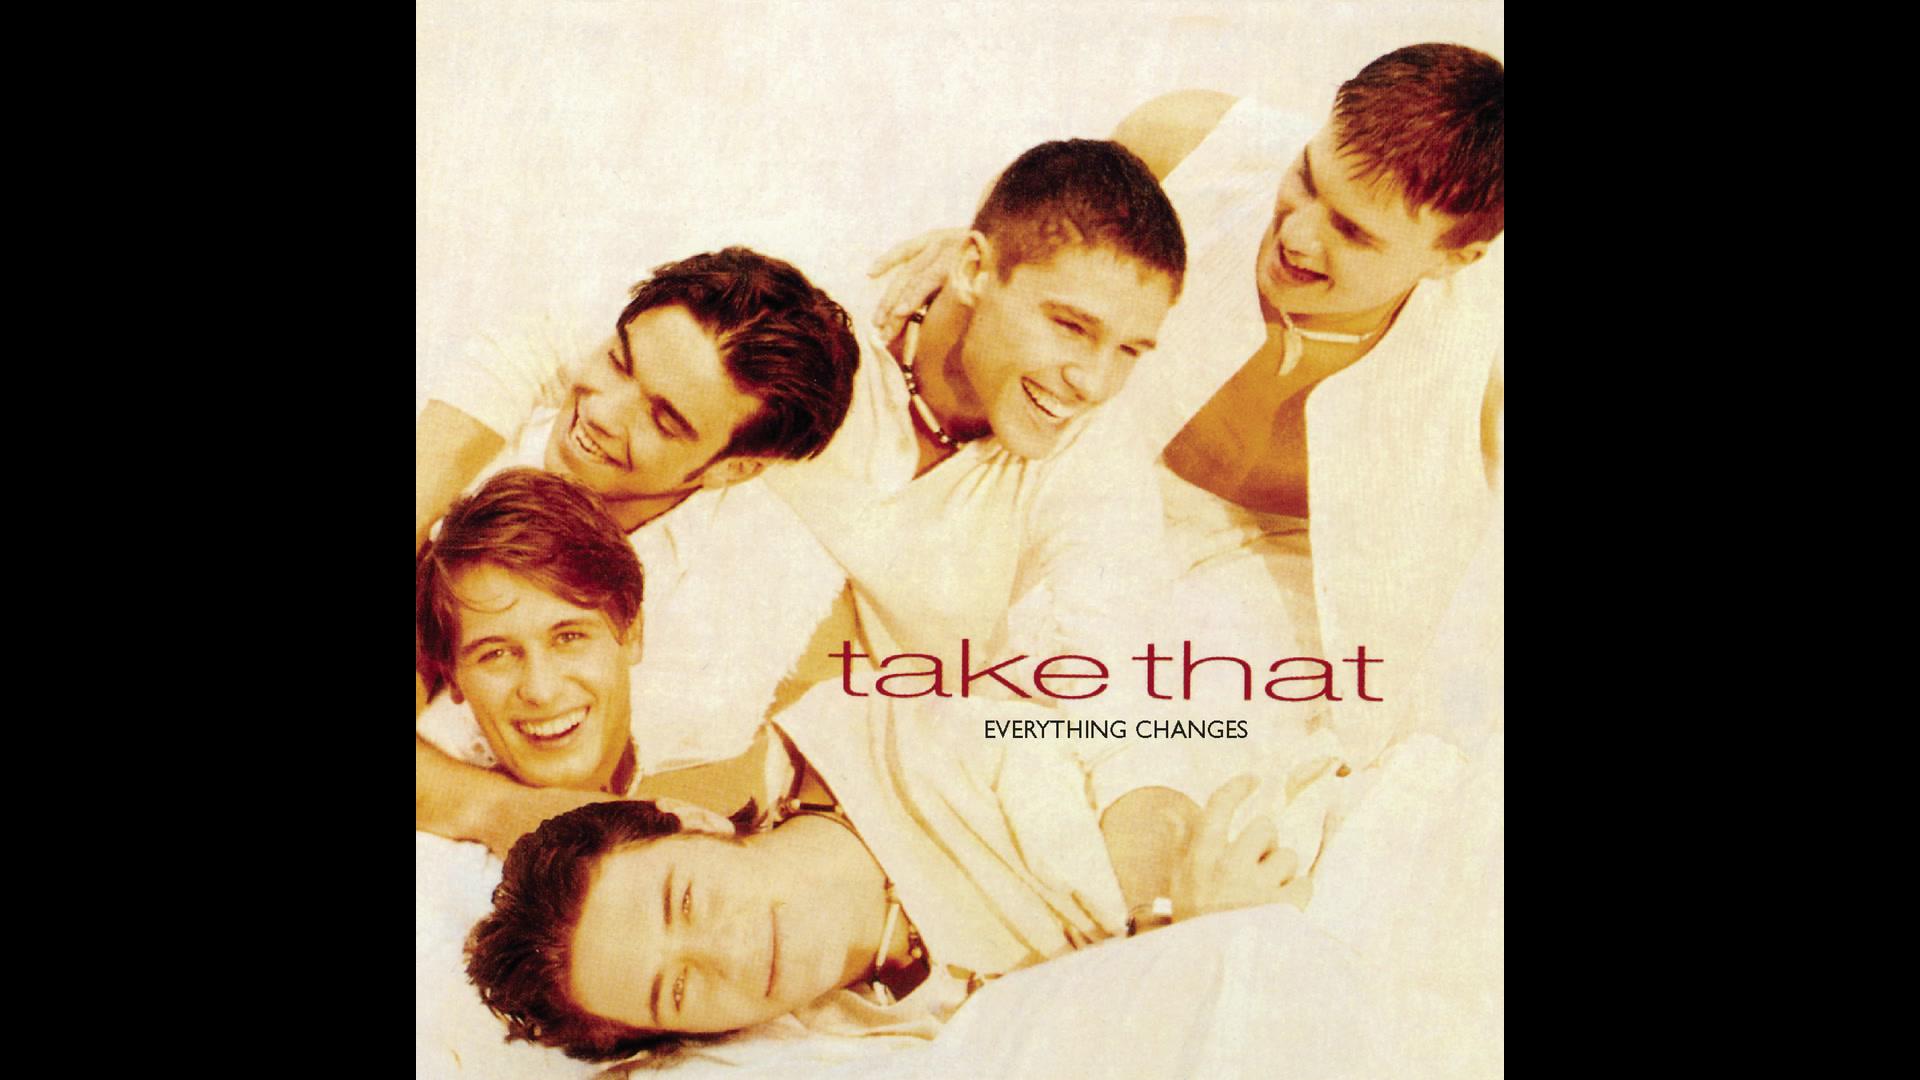 Take That - All I Want Is You (Audio)